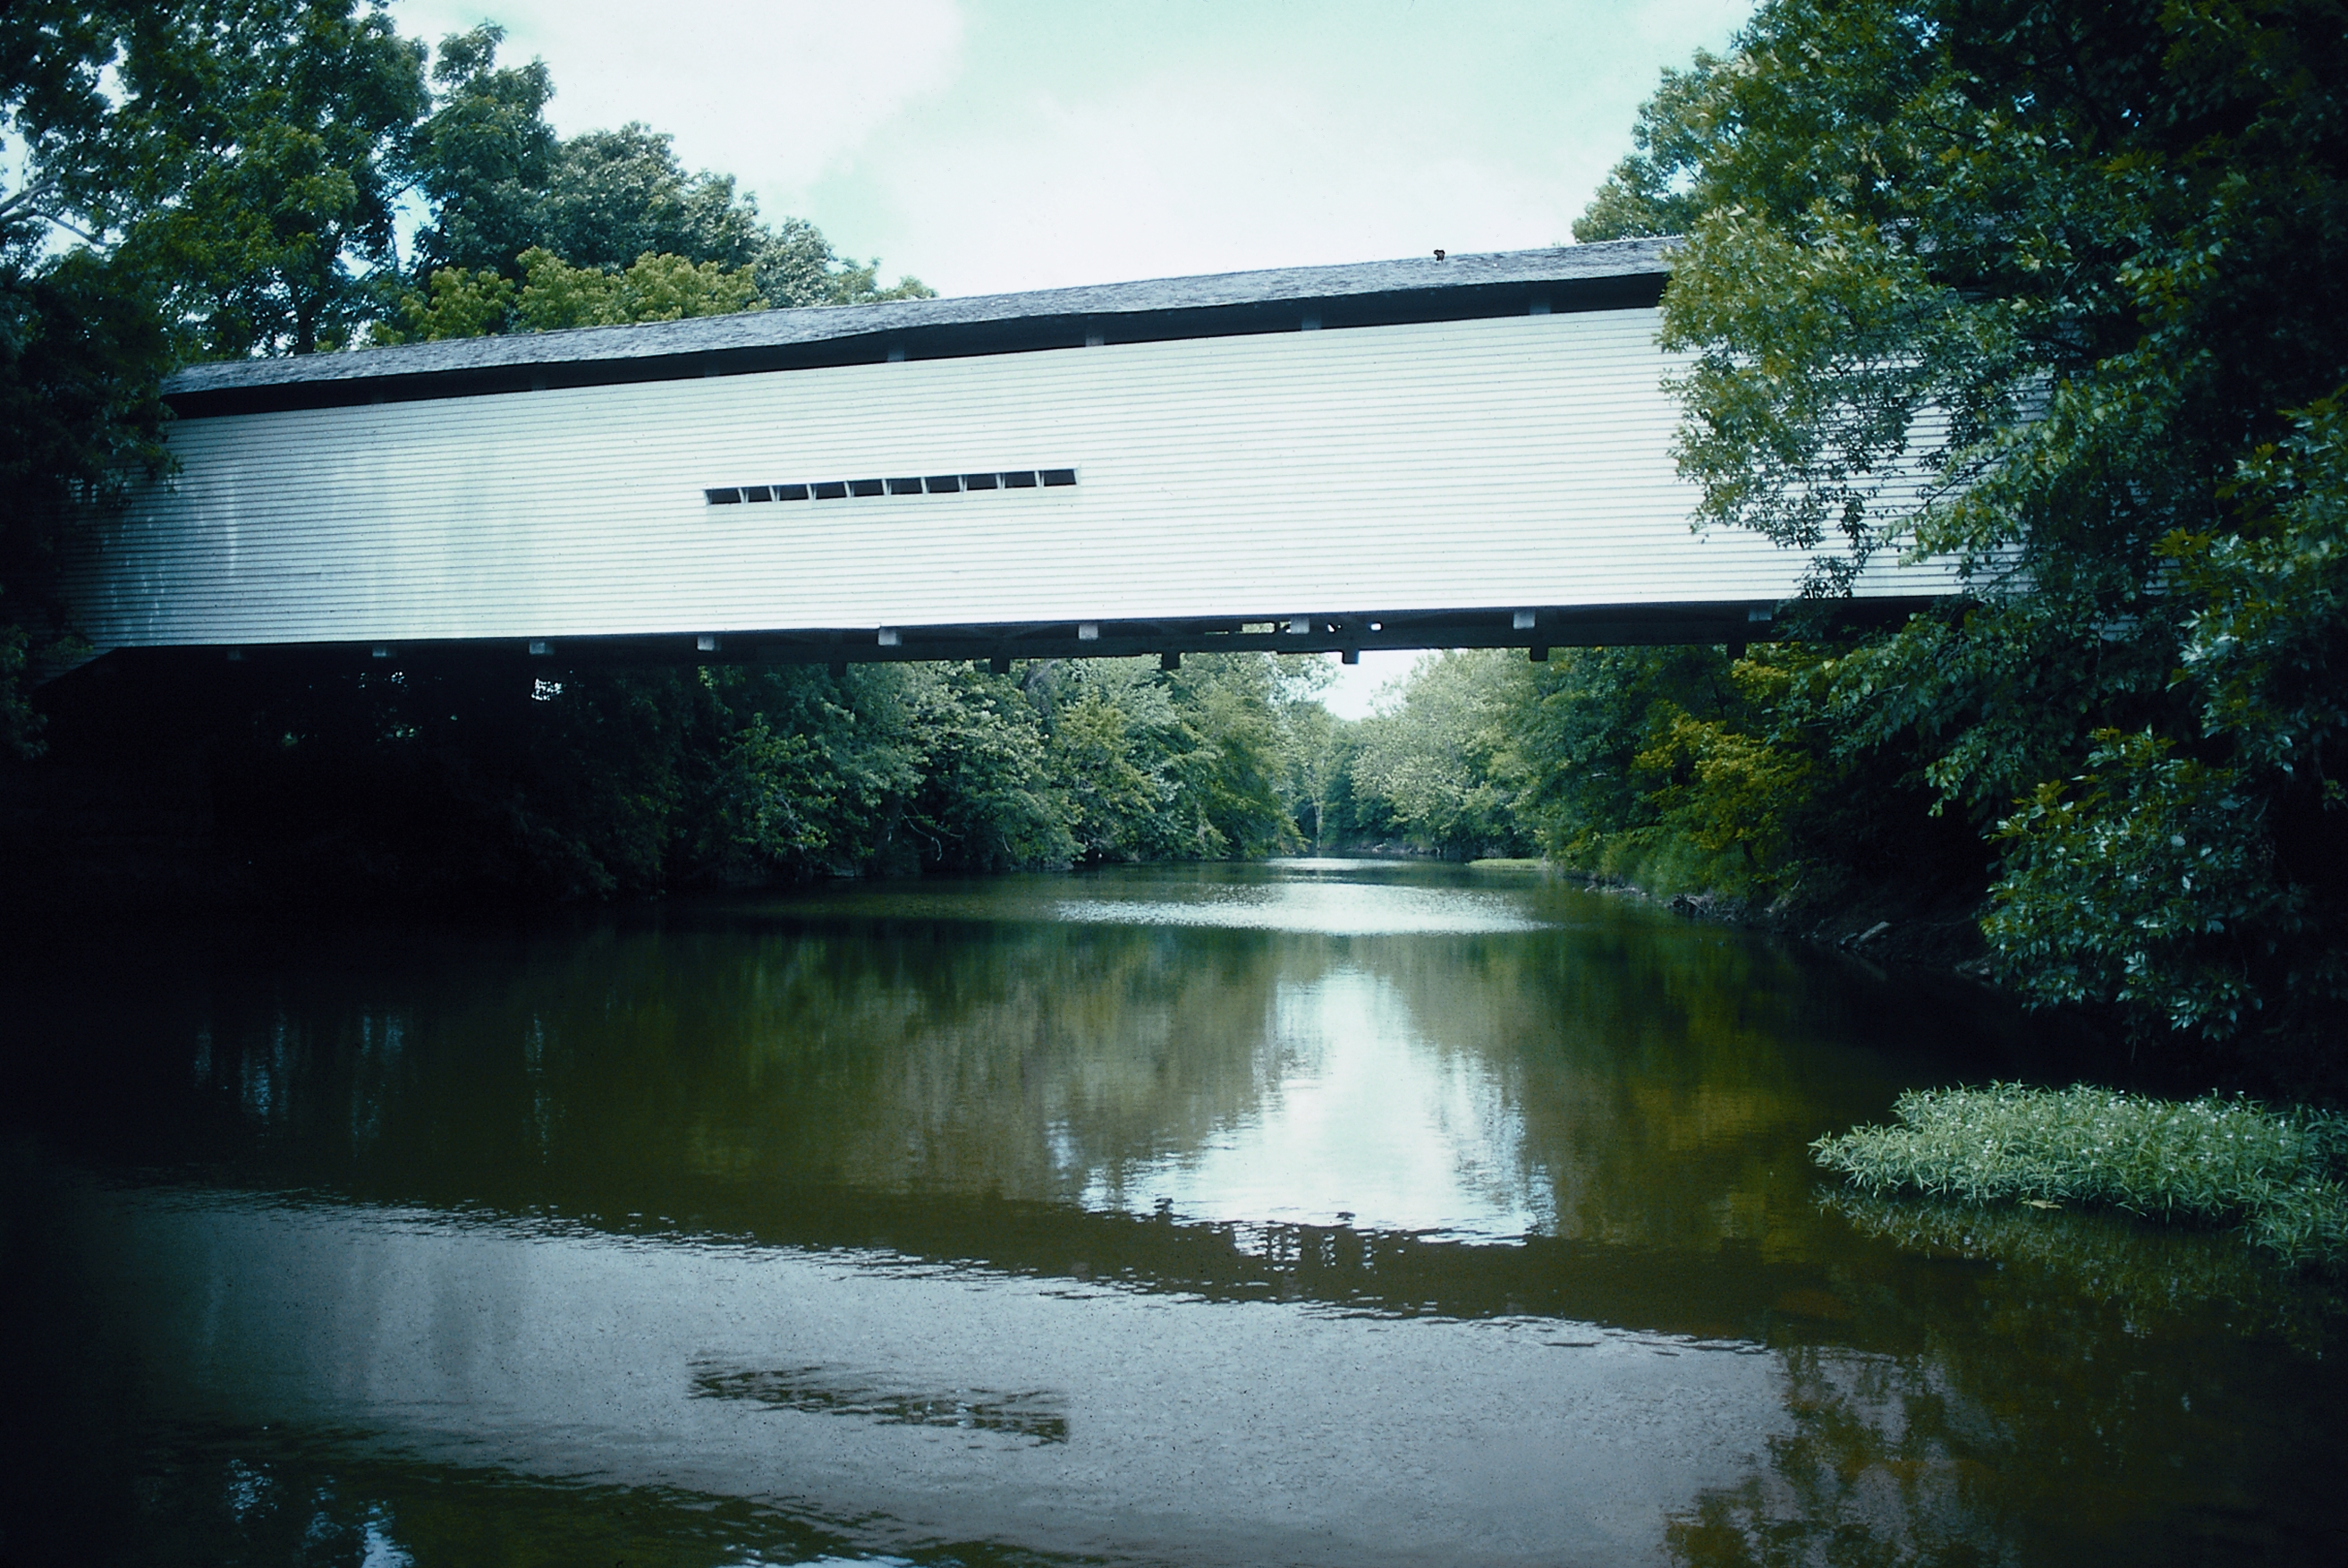 the covered bridge spanning over the creek